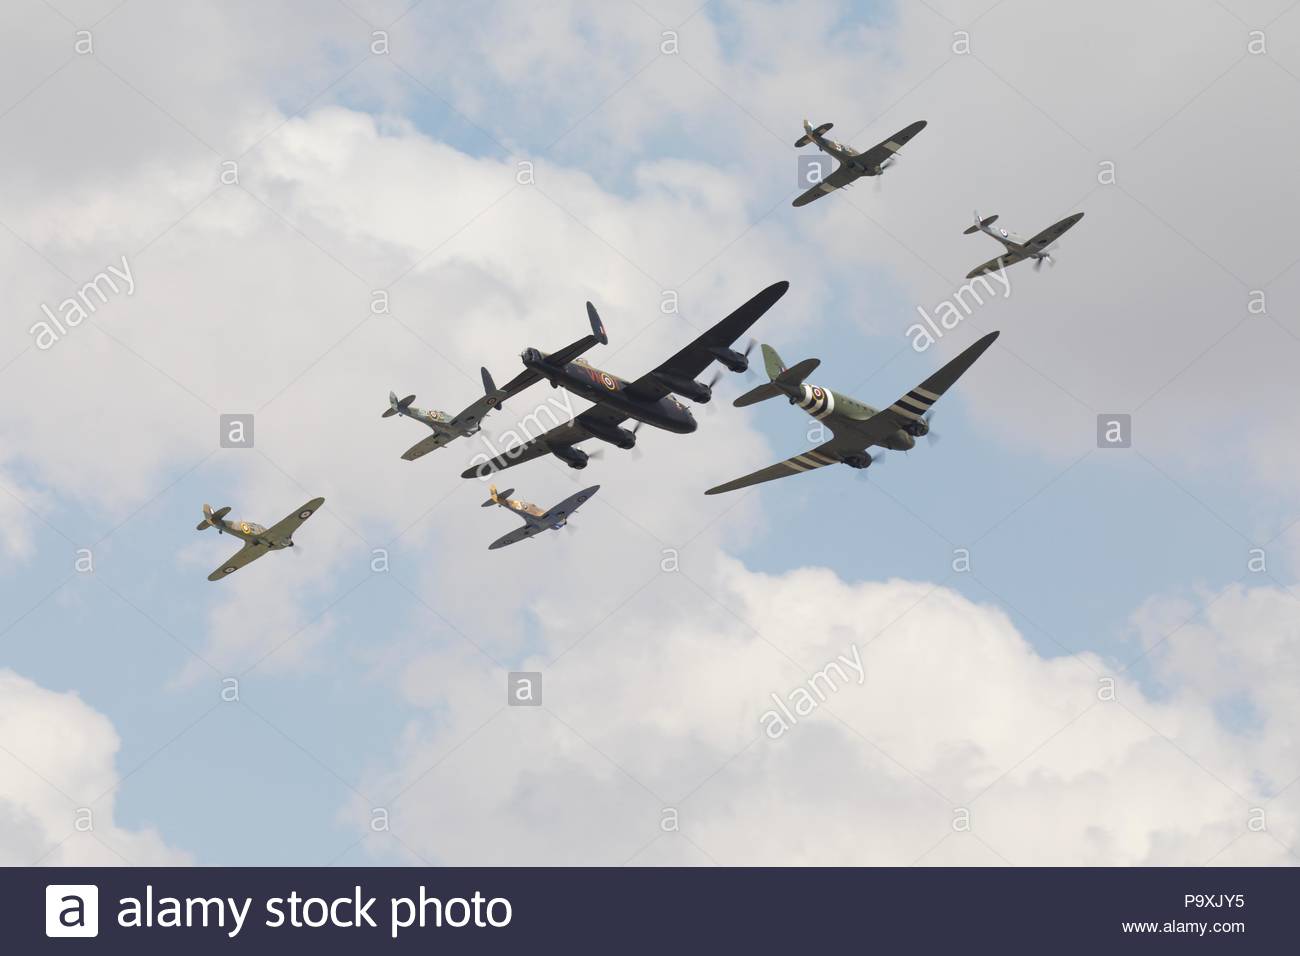 bbmf trenchard plus formation at the 2018 royal international air tattoo celebrating 100 years of the royal air force P9XJY5